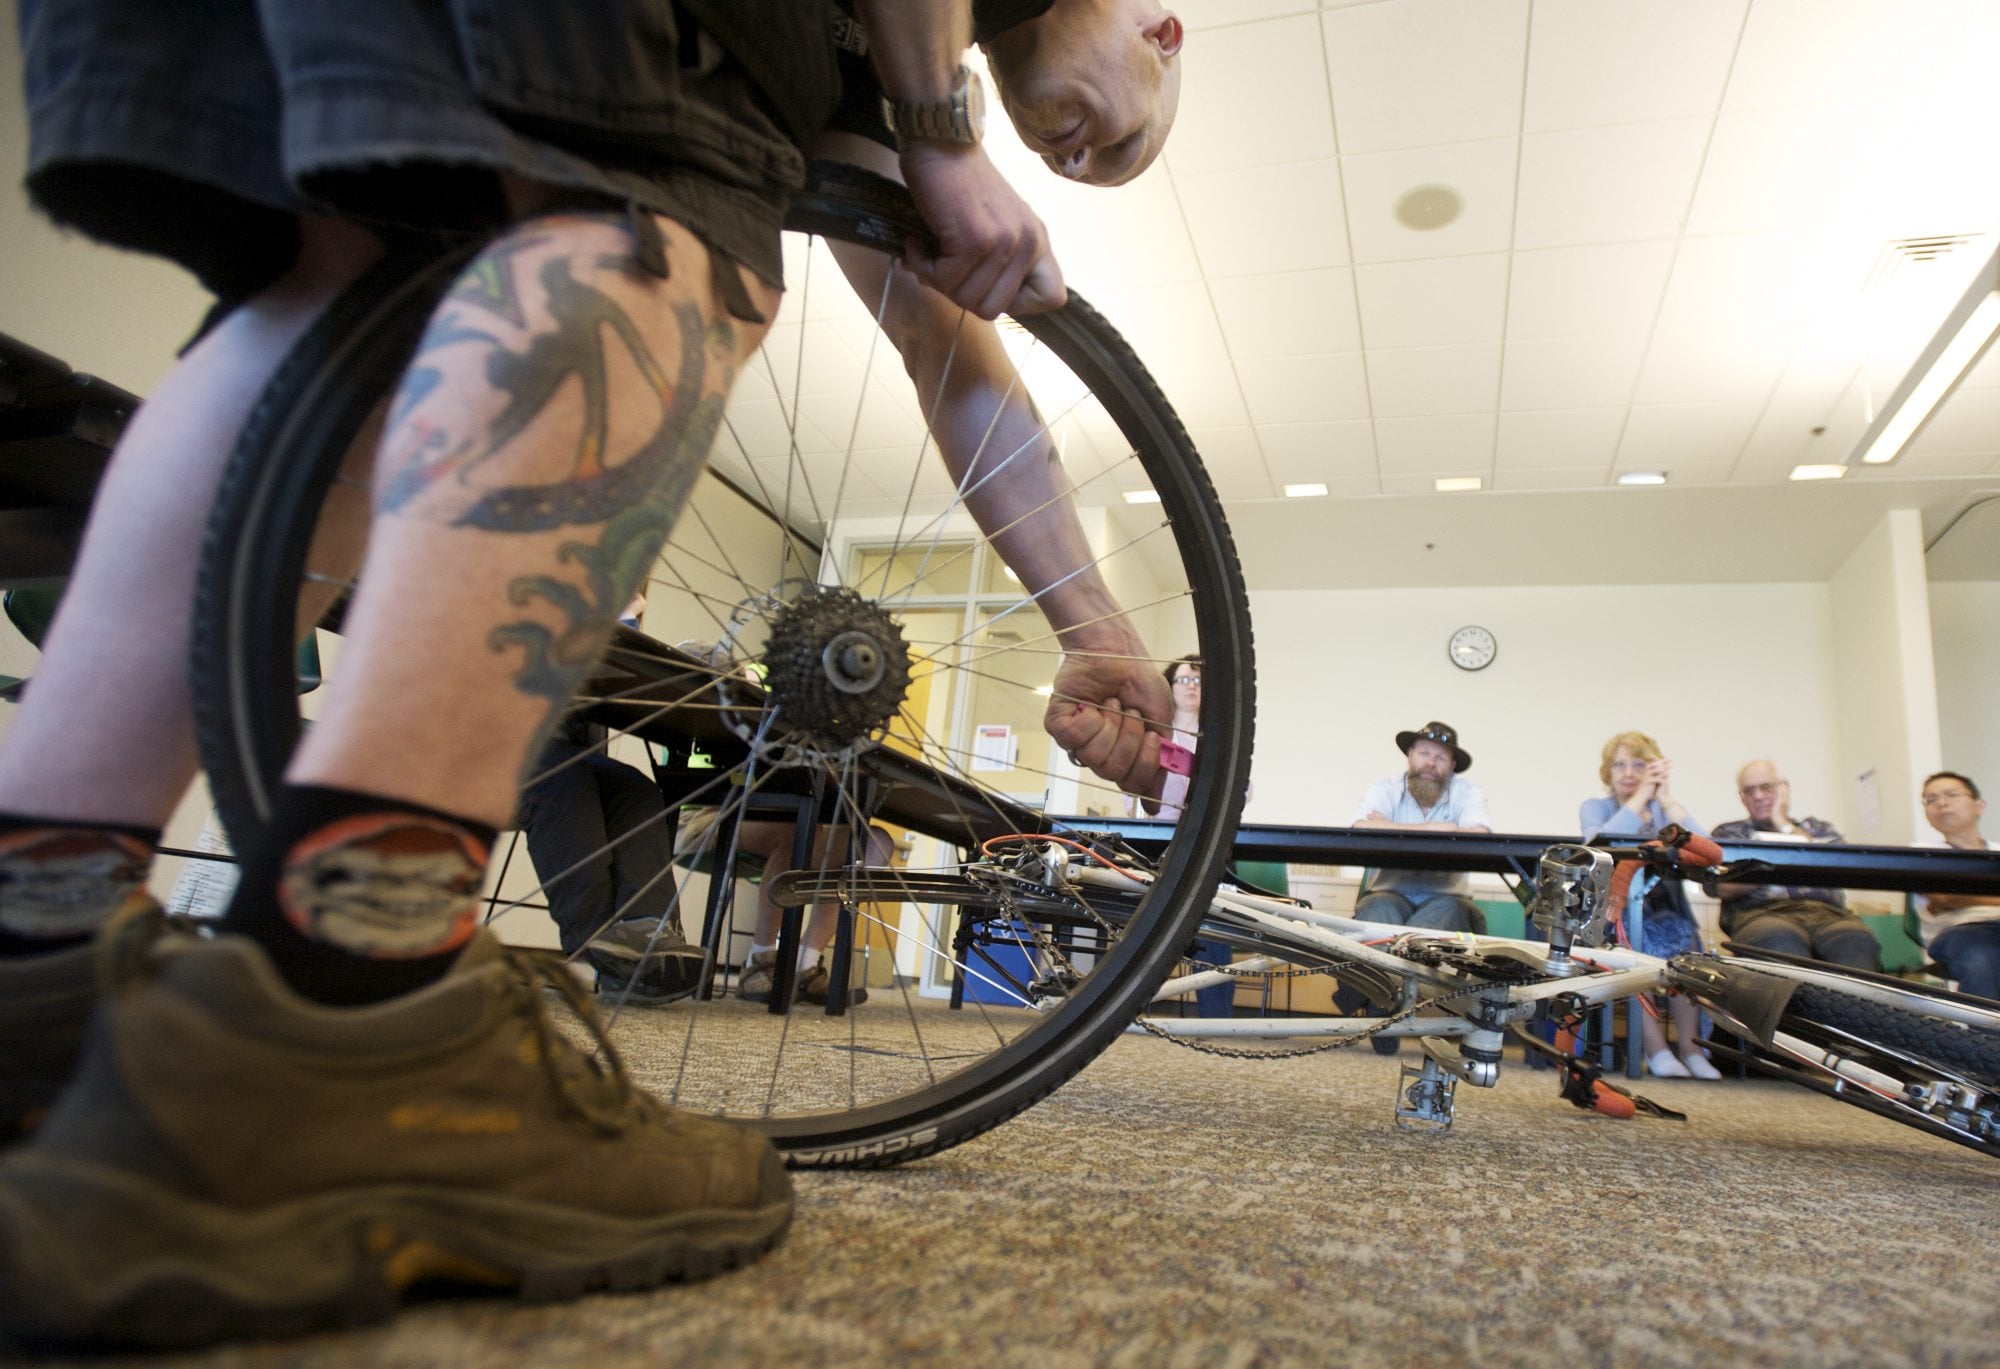 Wade Leckie of Bad Monkey Bikes, Board and Skate of Vancouver demonstrates how to fix a flat bicycle tire during a workshop at the Do-It-Yourself Fair at Clark College on Sunday.